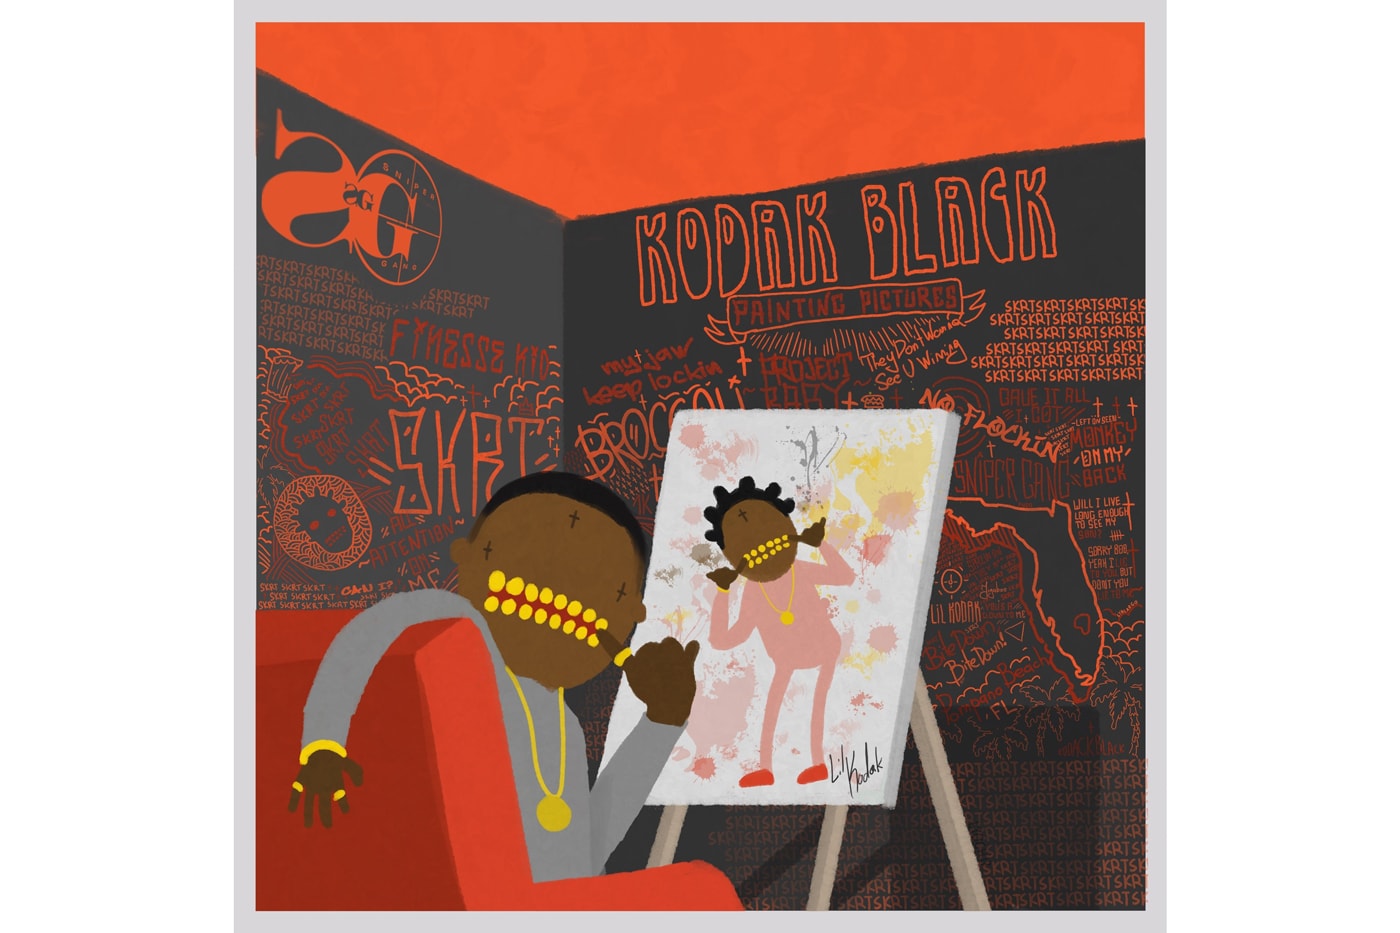 Kodak Black Debut Album Painting Pictures Tunnel Vision Future Young Thug